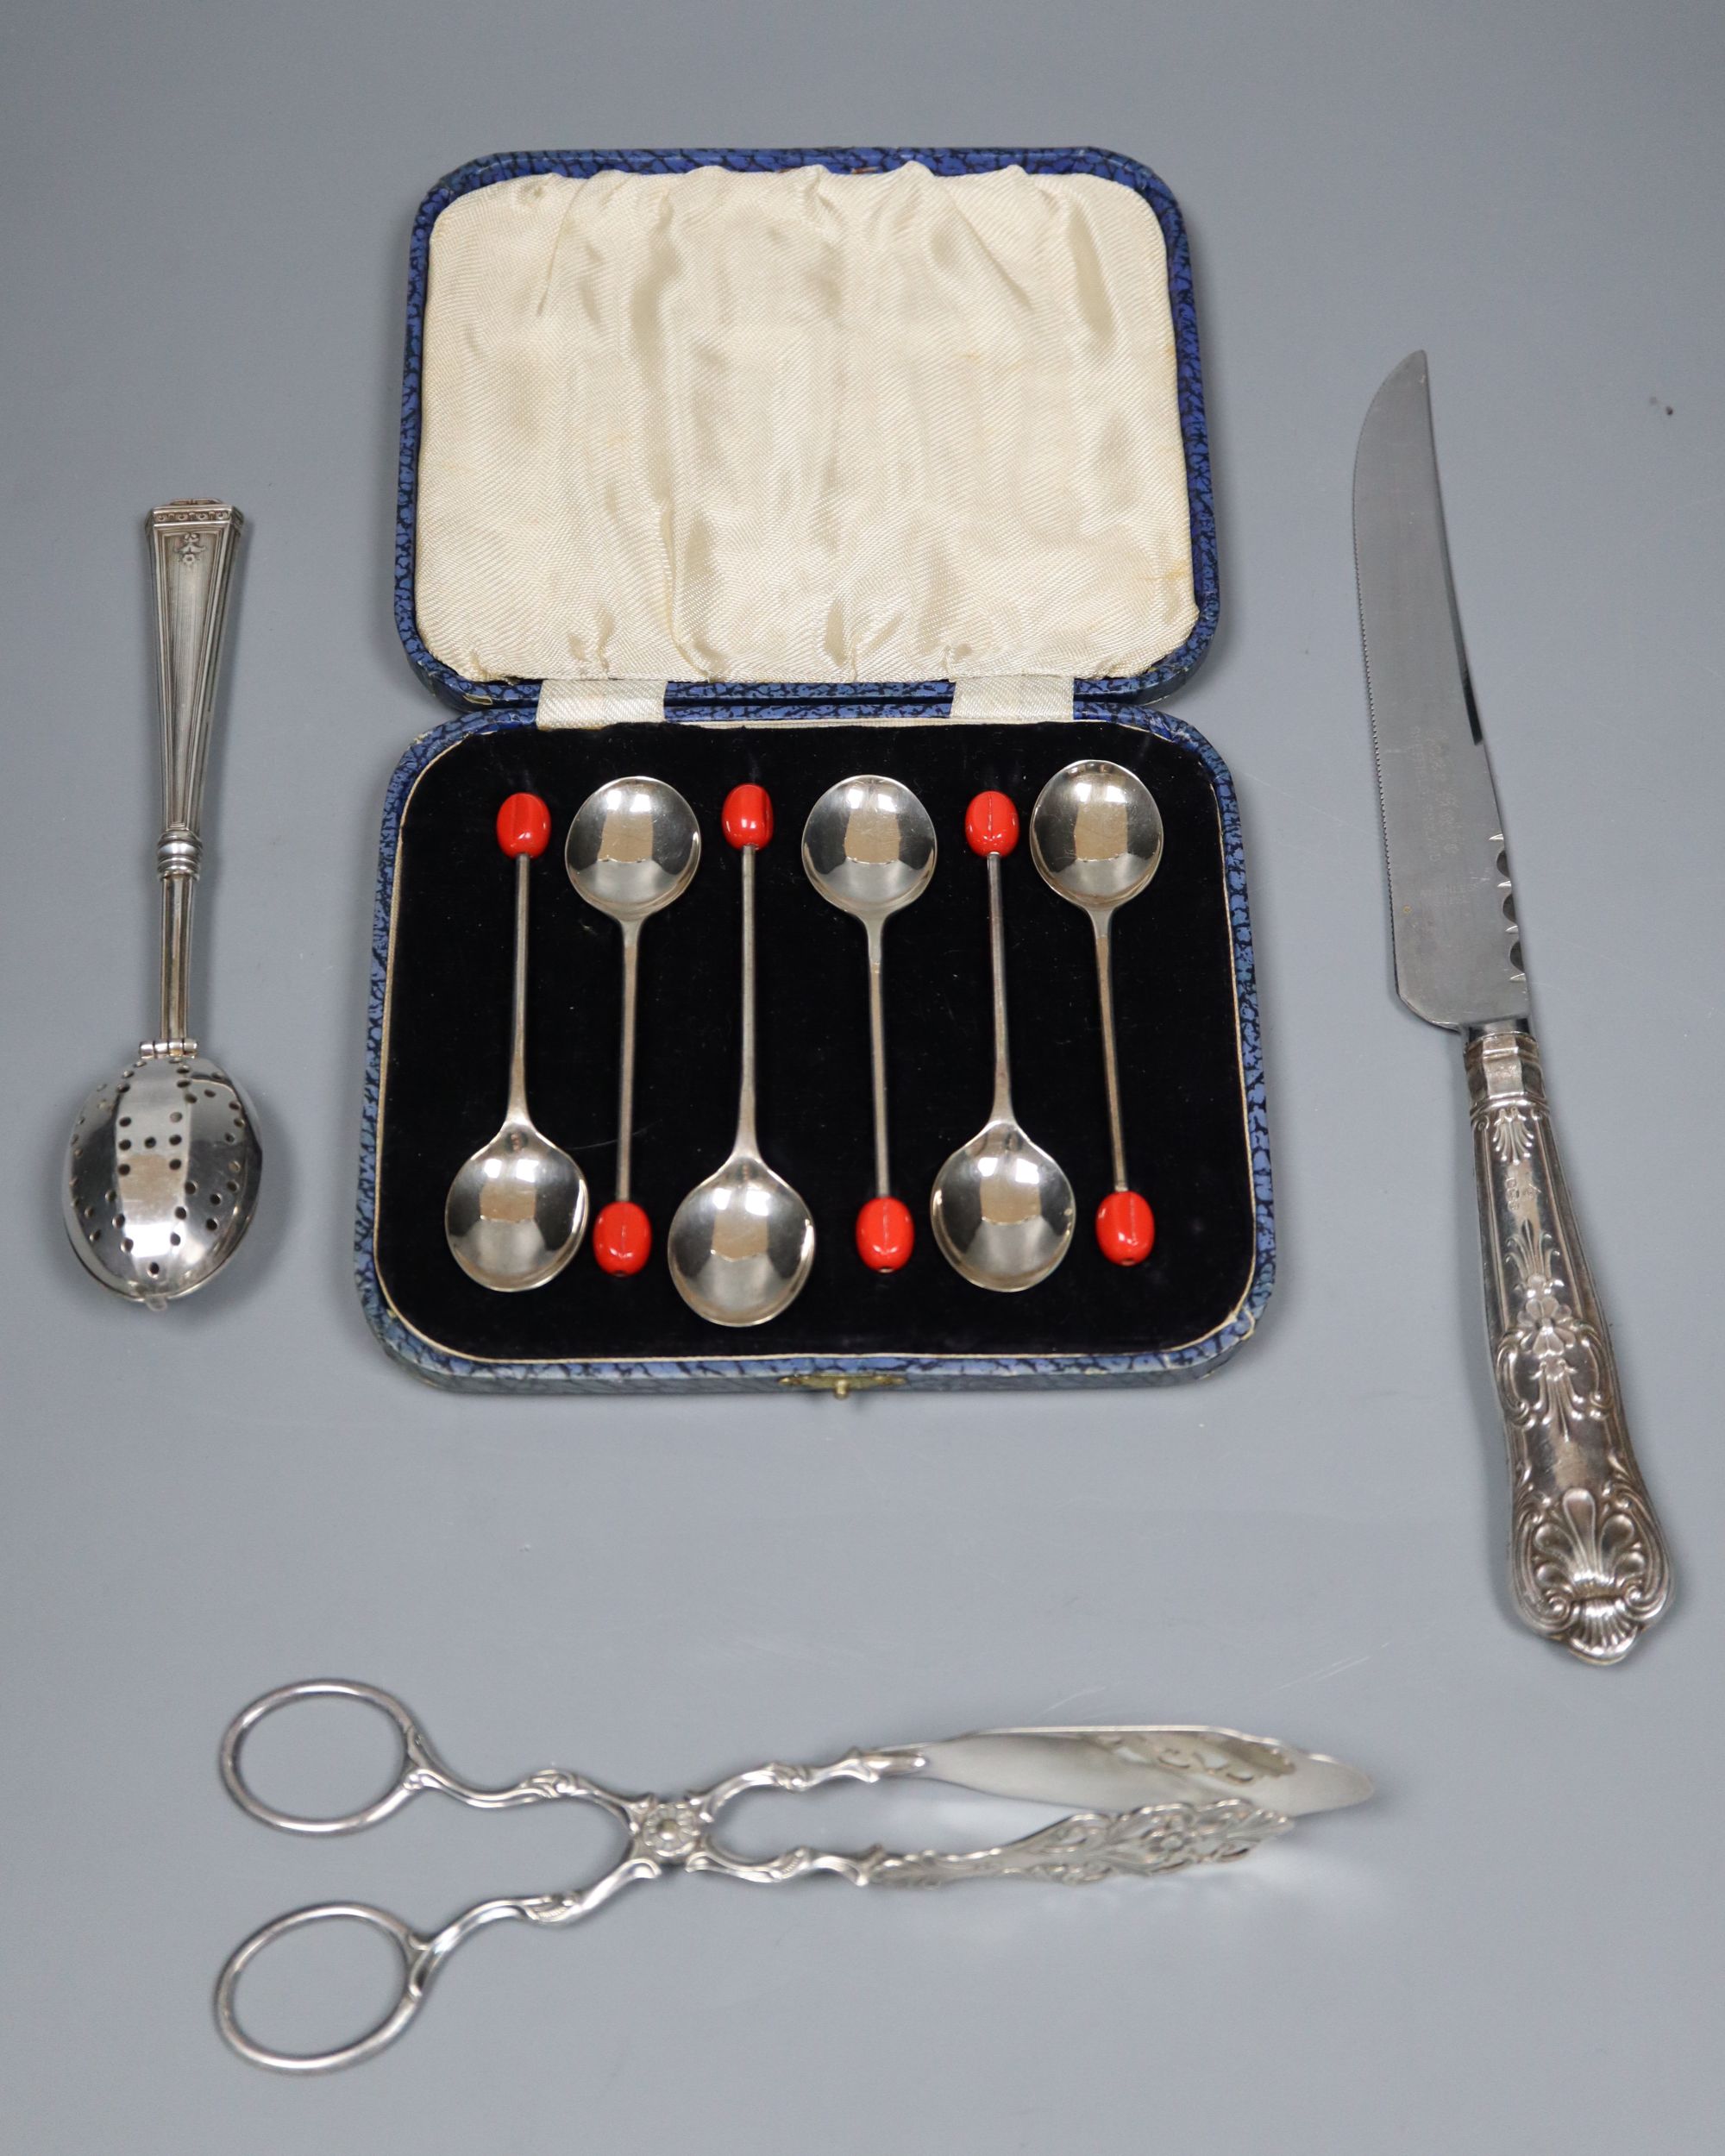 An 830s pastry tongs, a knife, a cased set of six bean end coffee spoons and an infuser.